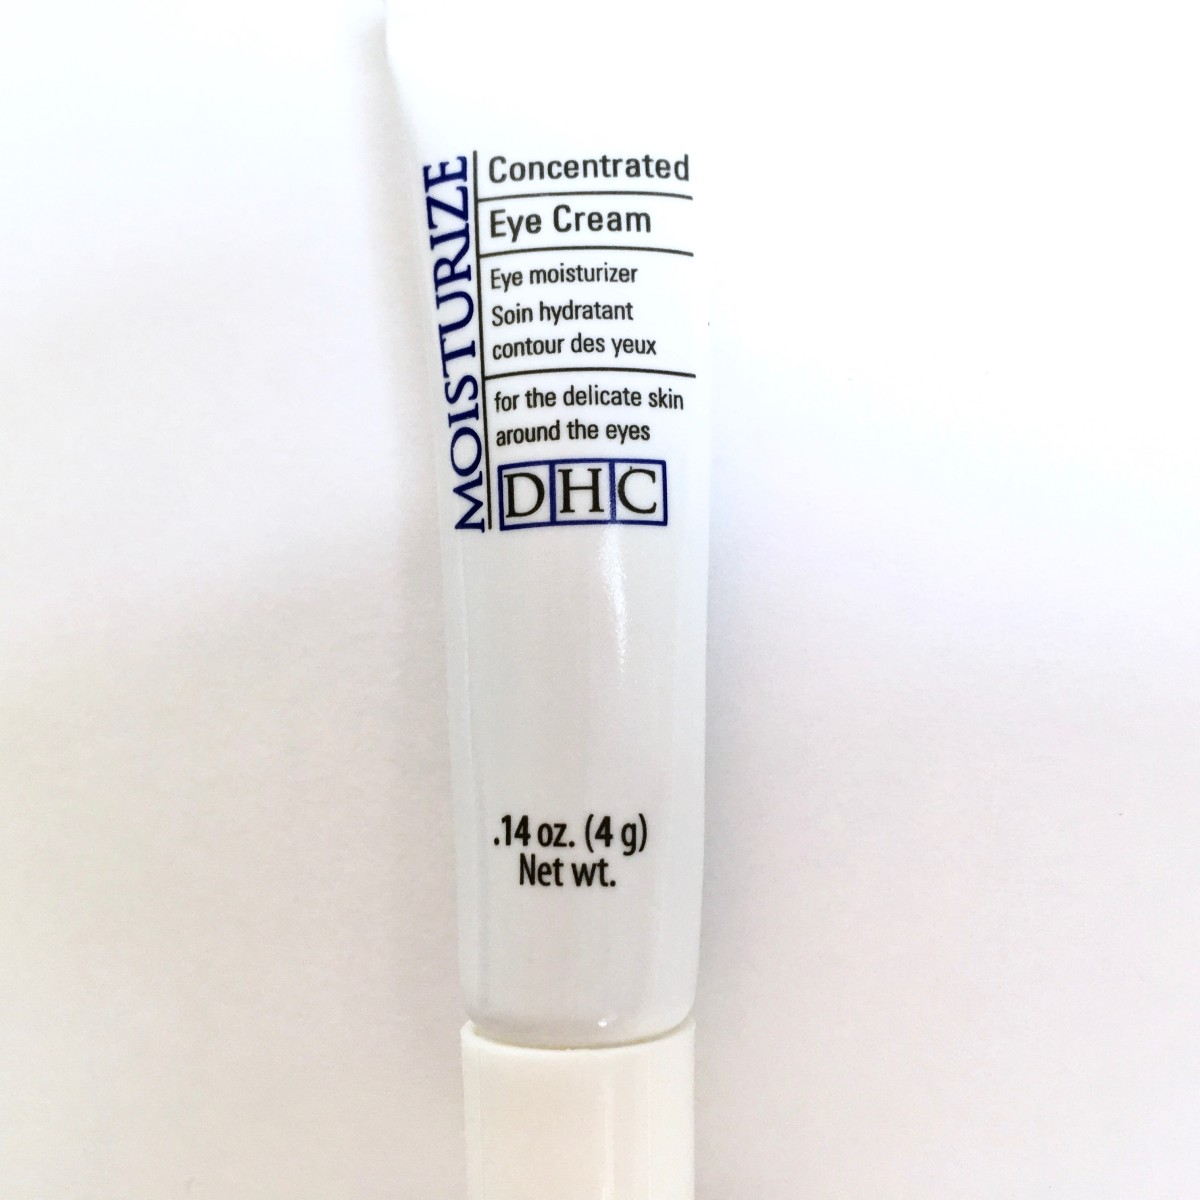 DHC Concentrated Eye Cream - This is the travel size tube, which is a good way to try out this eye cream.